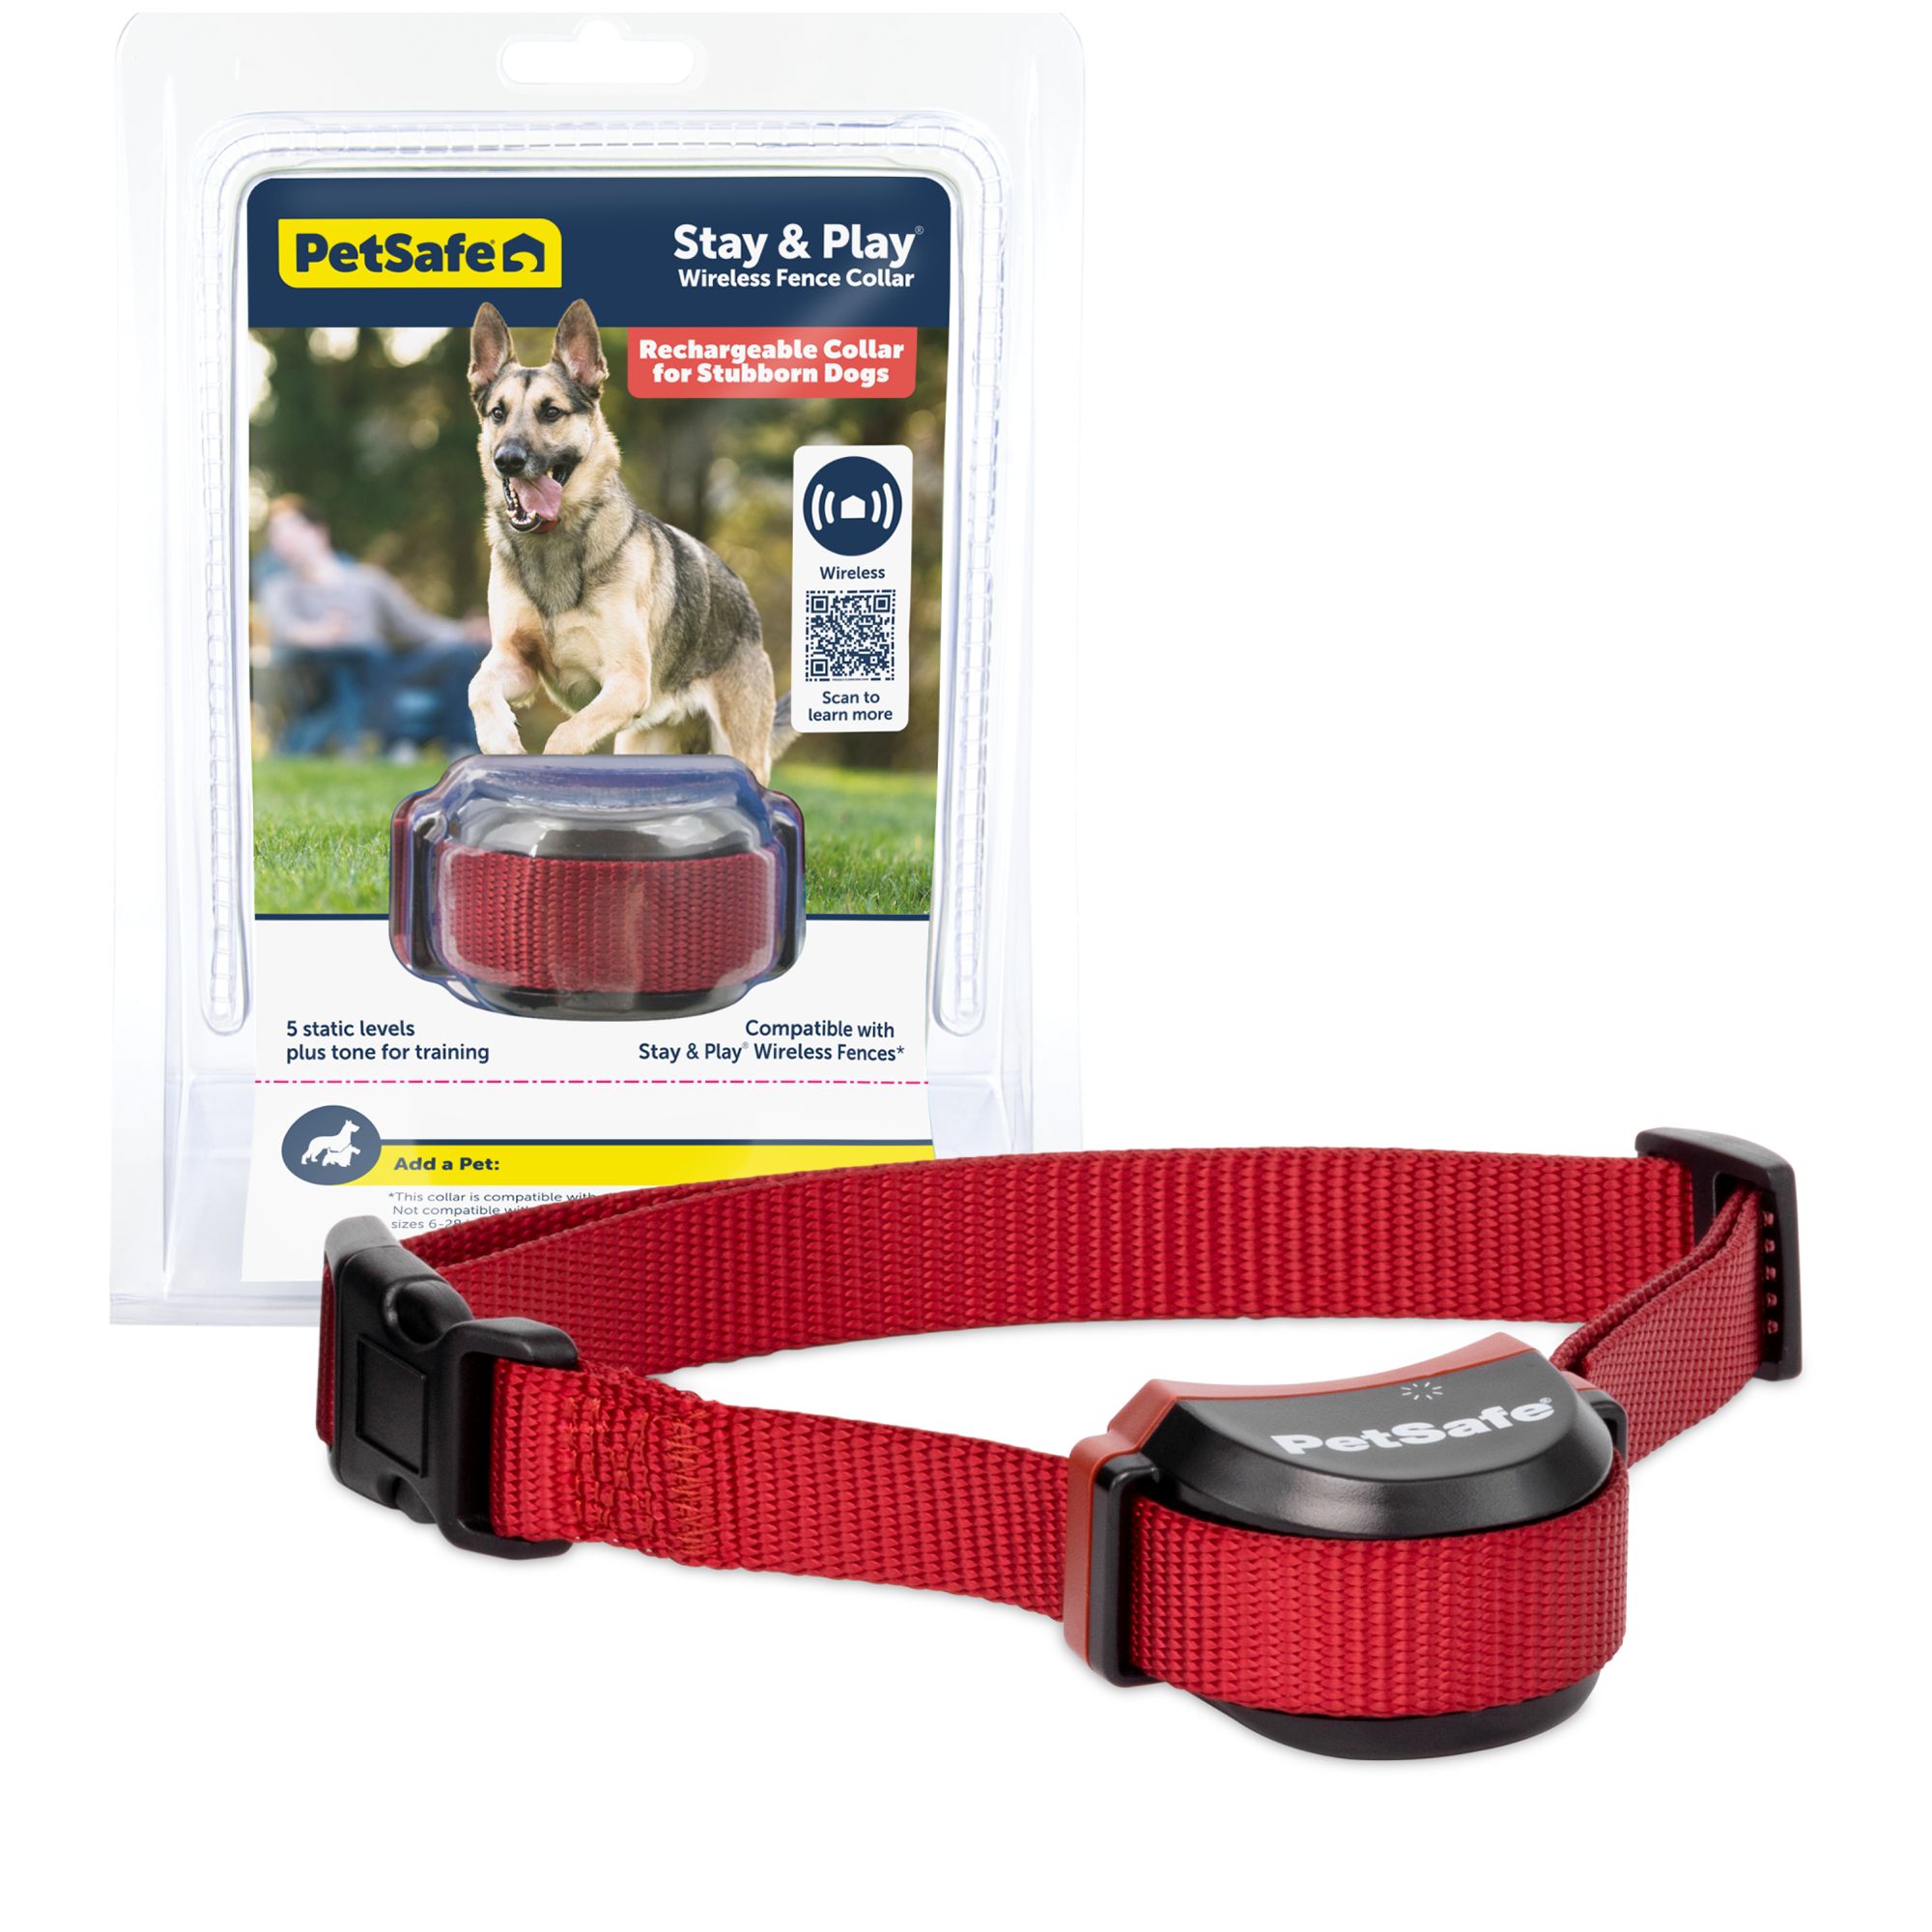 replacement collar for wireless fence